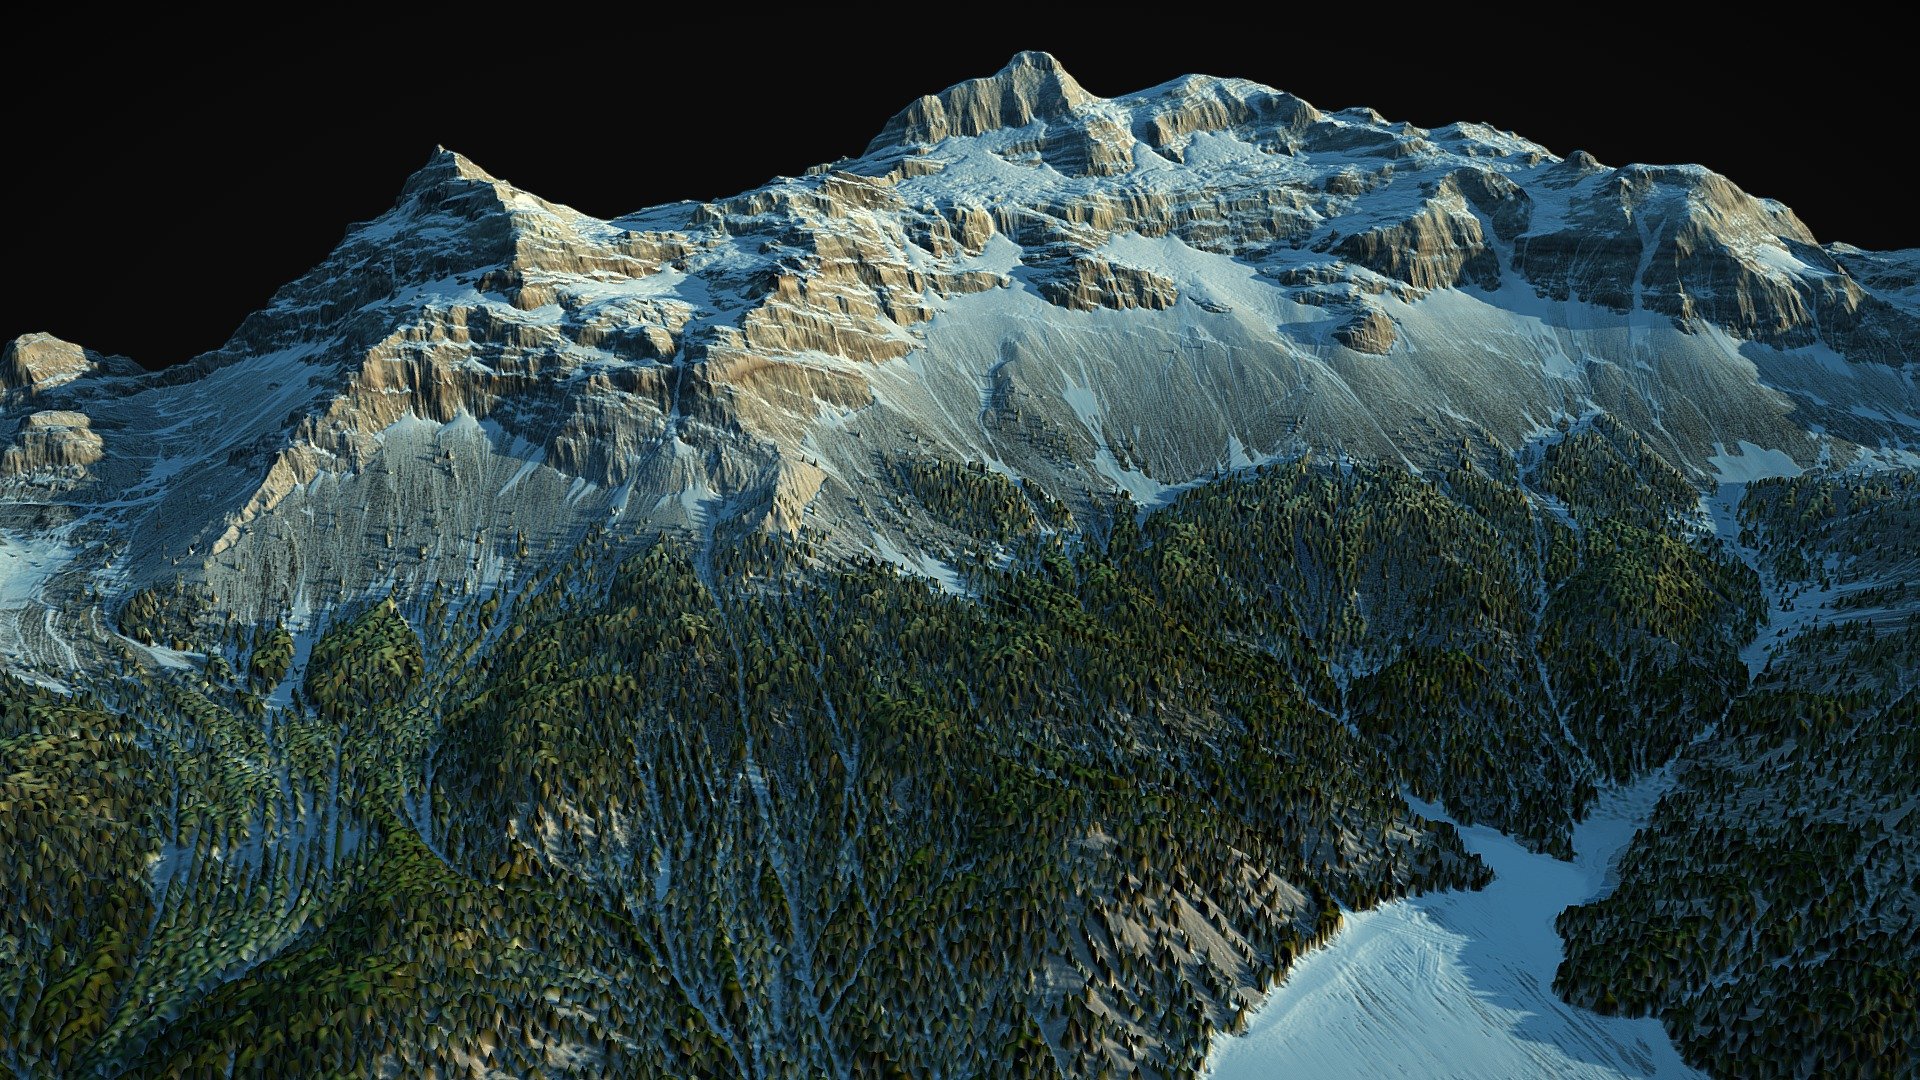 Fully Procedural Landscape created in World Machine.
Inspired by winter. Go hiking! Mountains are beautiful! - Winter forest mountains - (World Machine) - Buy Royalty Free 3D model by gamewarming 3d model